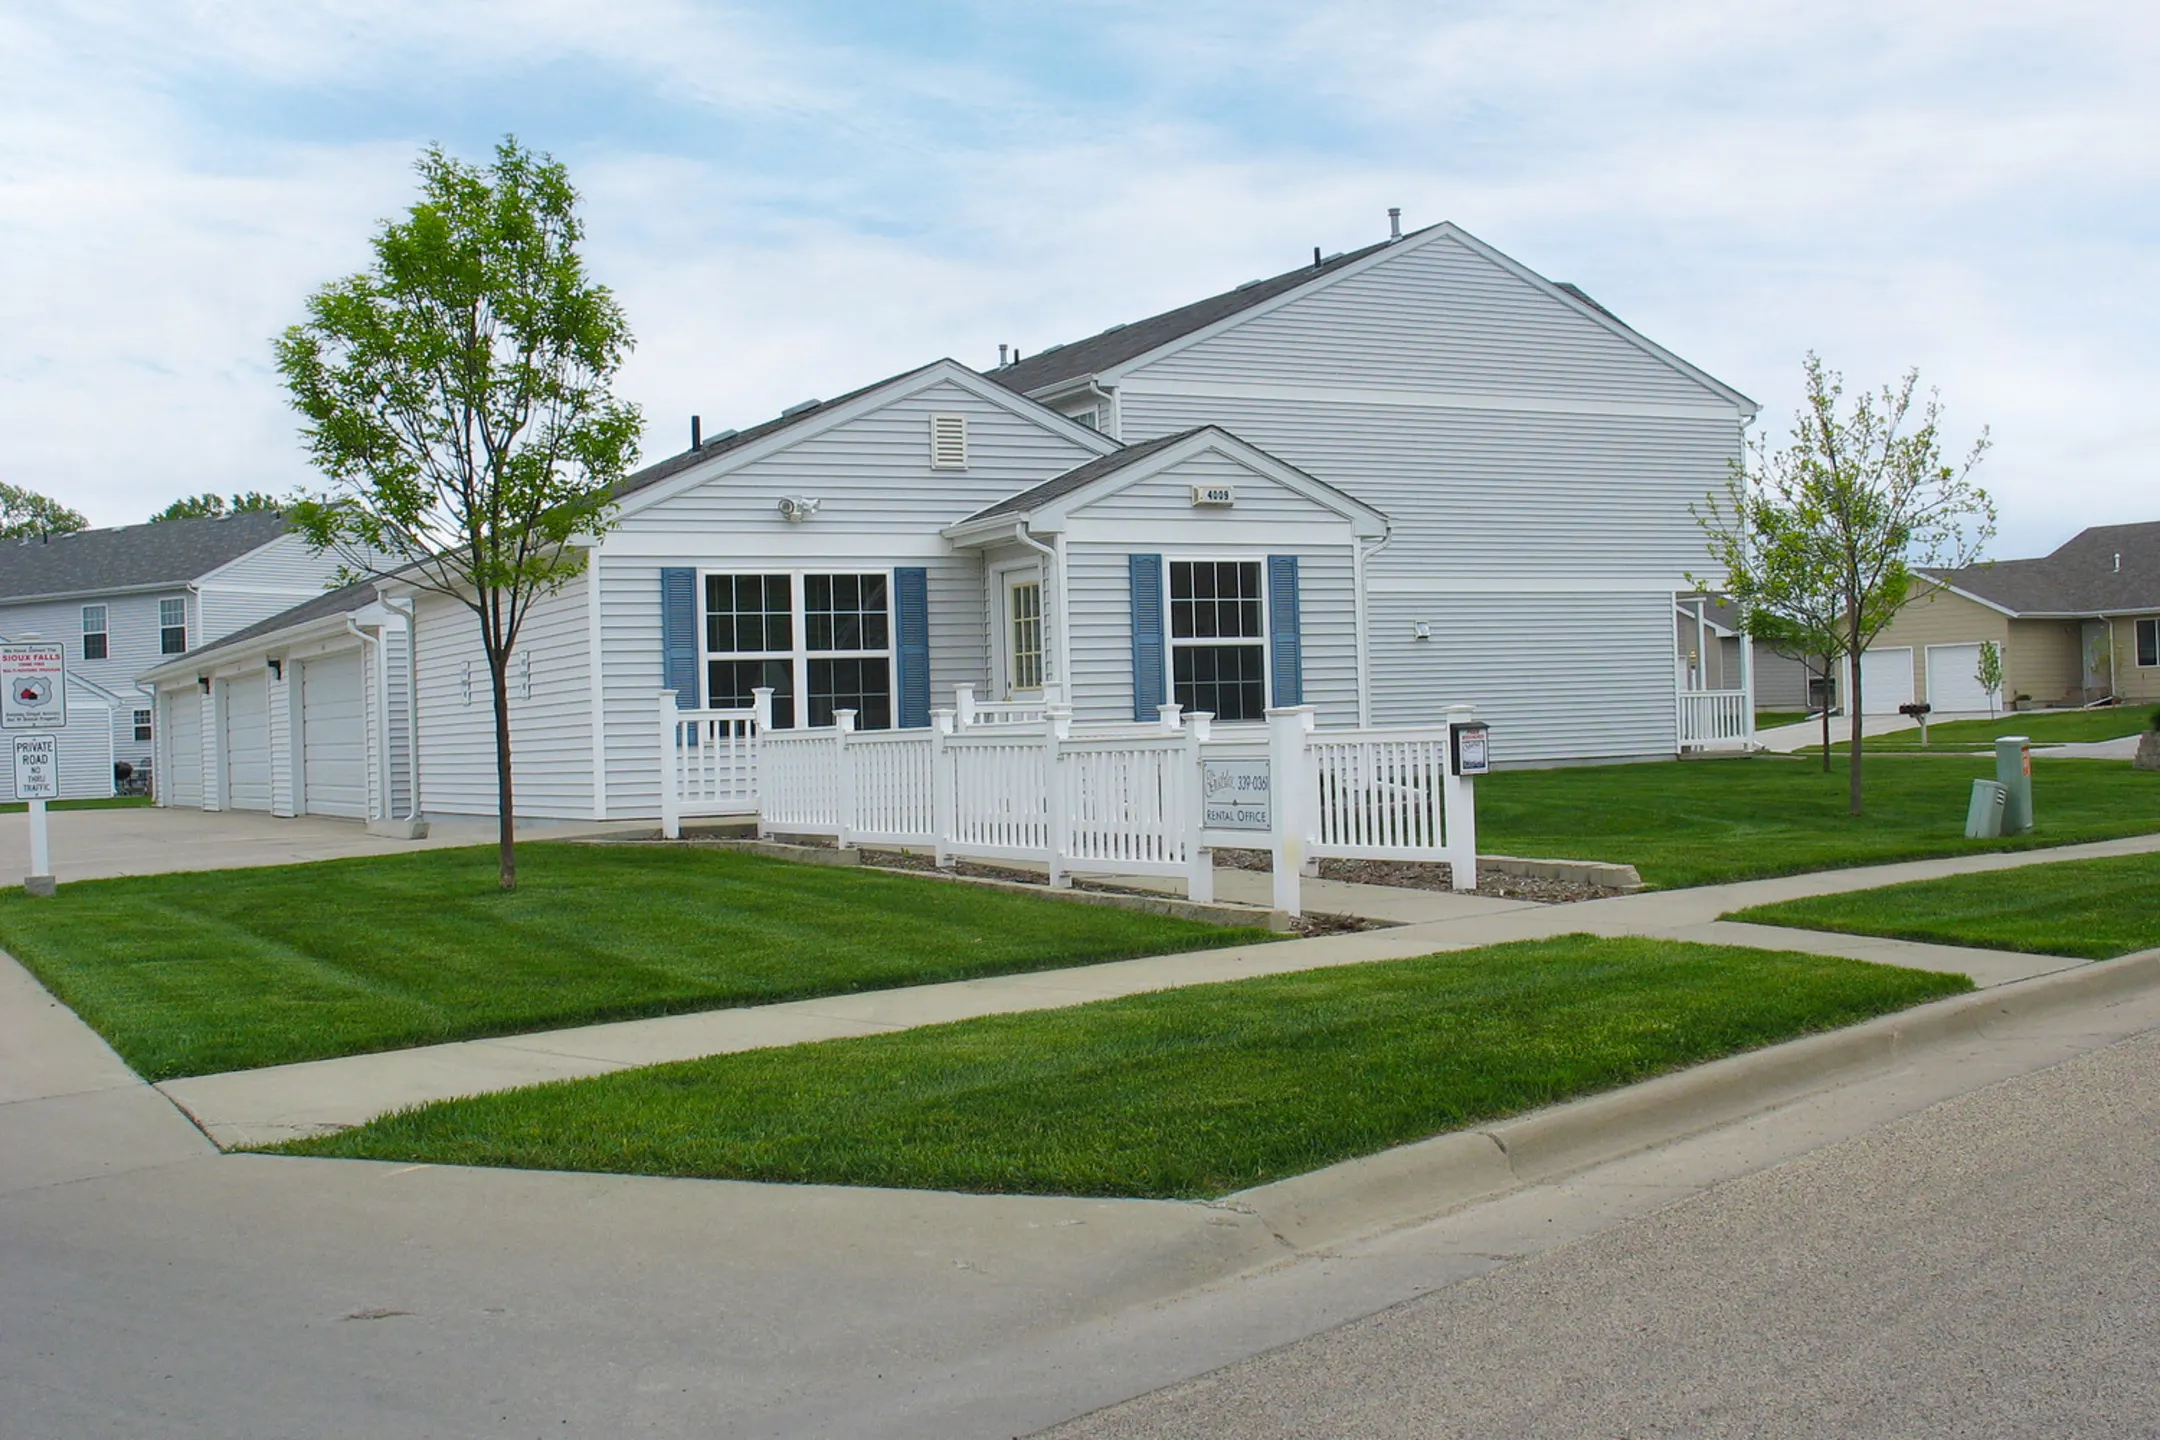 Building - The Gables Townhomes - Sioux Falls, SD